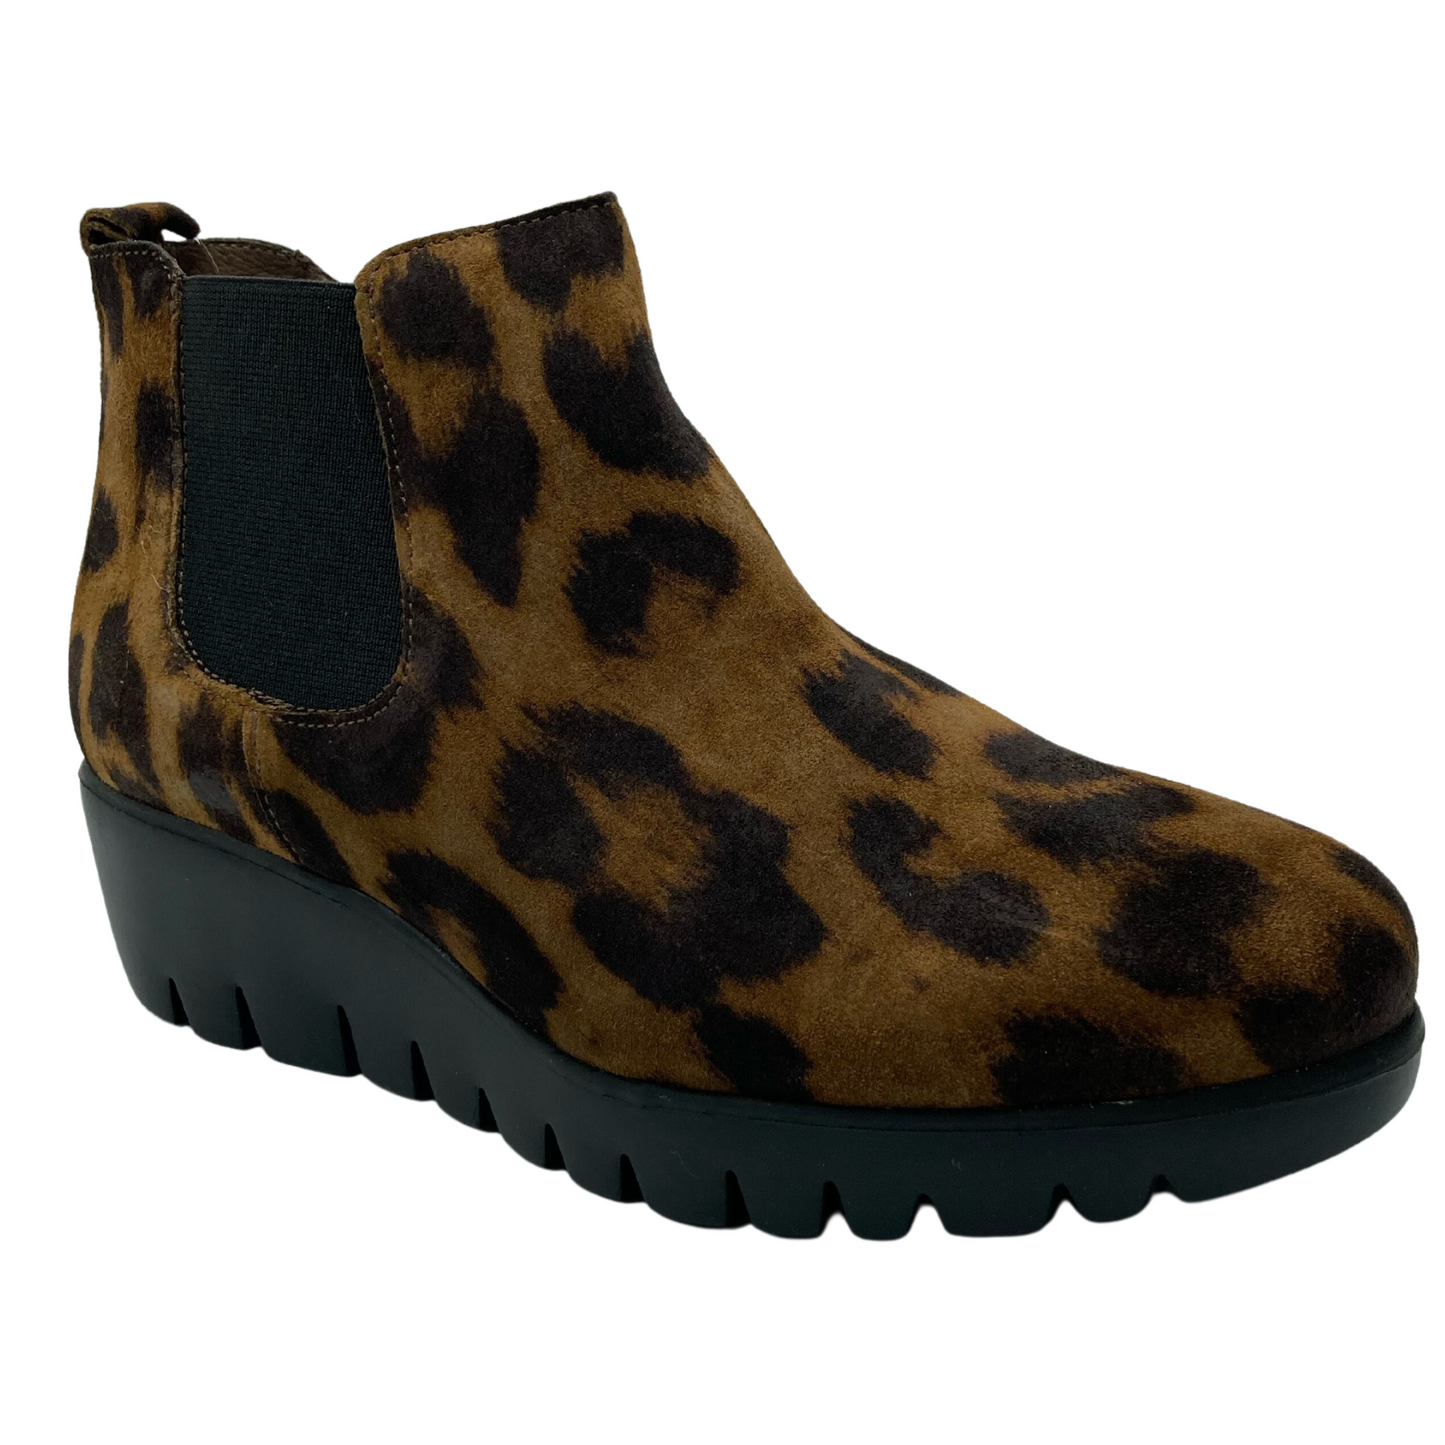 45 degree angled view of suede leopard print ankle boot with black rubber outsole and elastic side gore